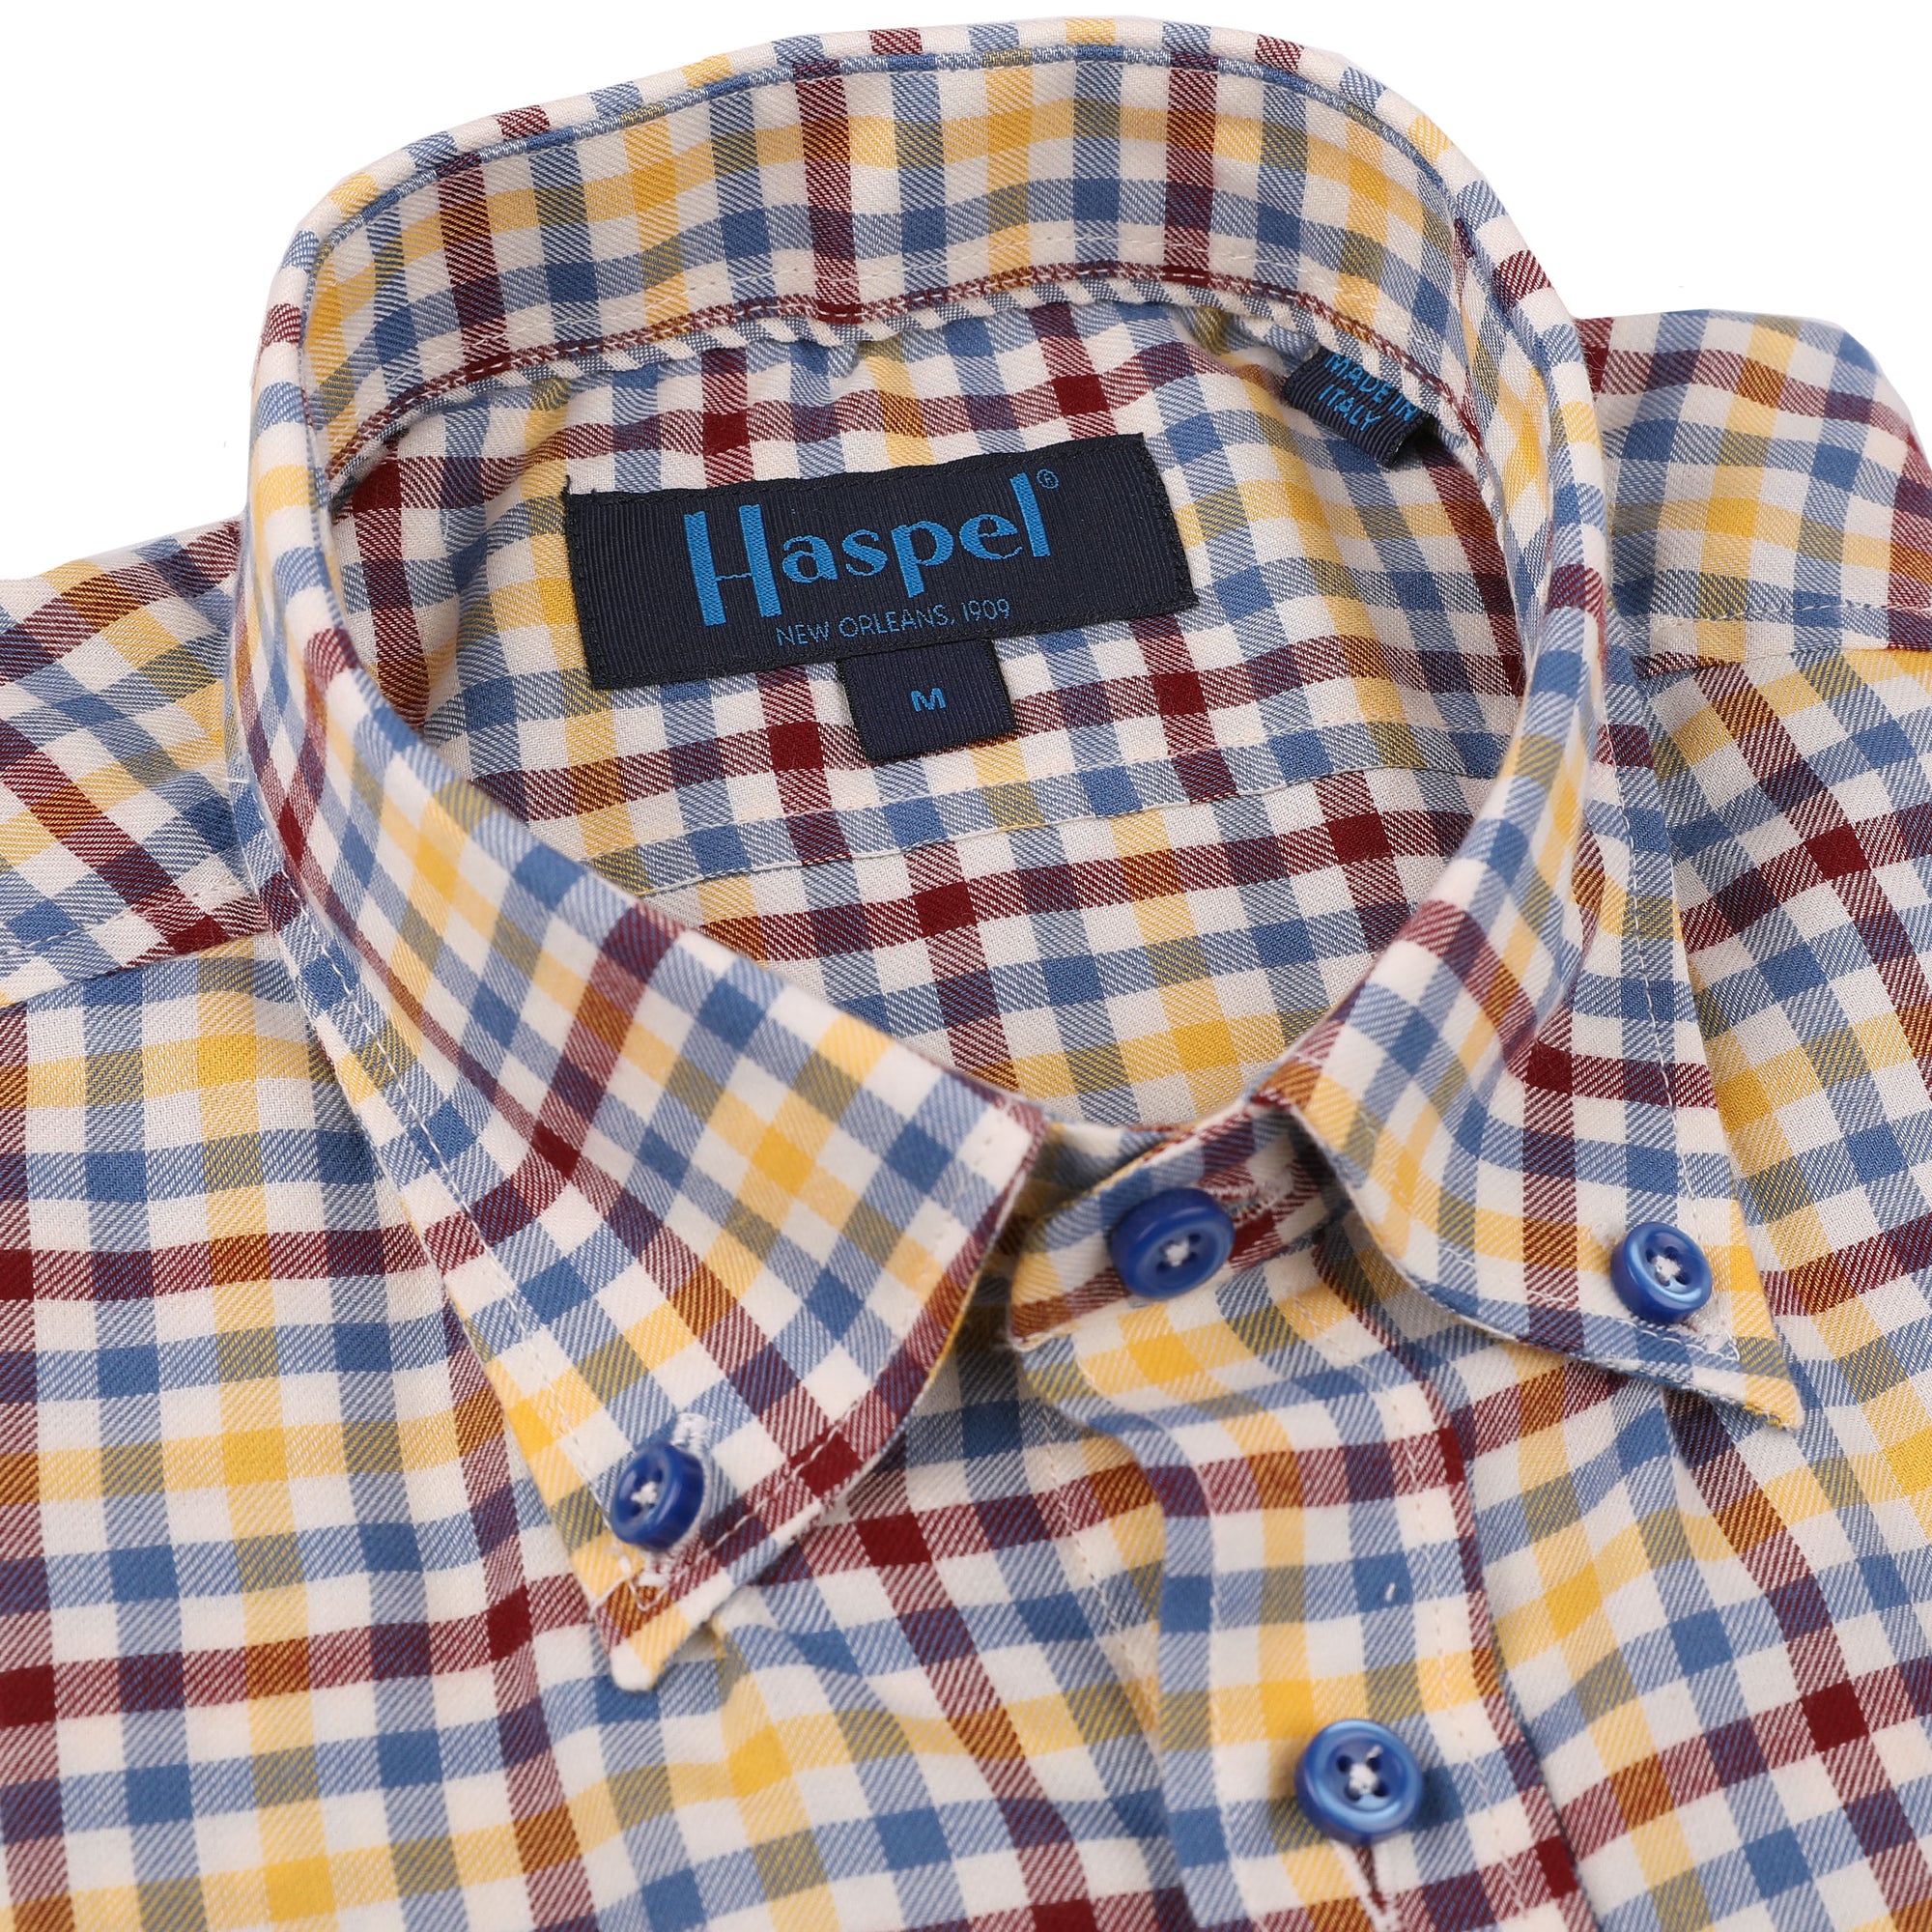 Keep cool in the Franklin Yellow, Blue & Burgundy Brushed Plaid shirt. Crafted with a yellow, blue, and burgundy brushed plaid, this stylish shirt delivers breathability and comfort. Beat the New Orleans heat in this cozy style!  100% Cotton • Short Sleeve • Button Down Collar • No Chest Pocket • Machine Wash • Made in Italy • Return Policy